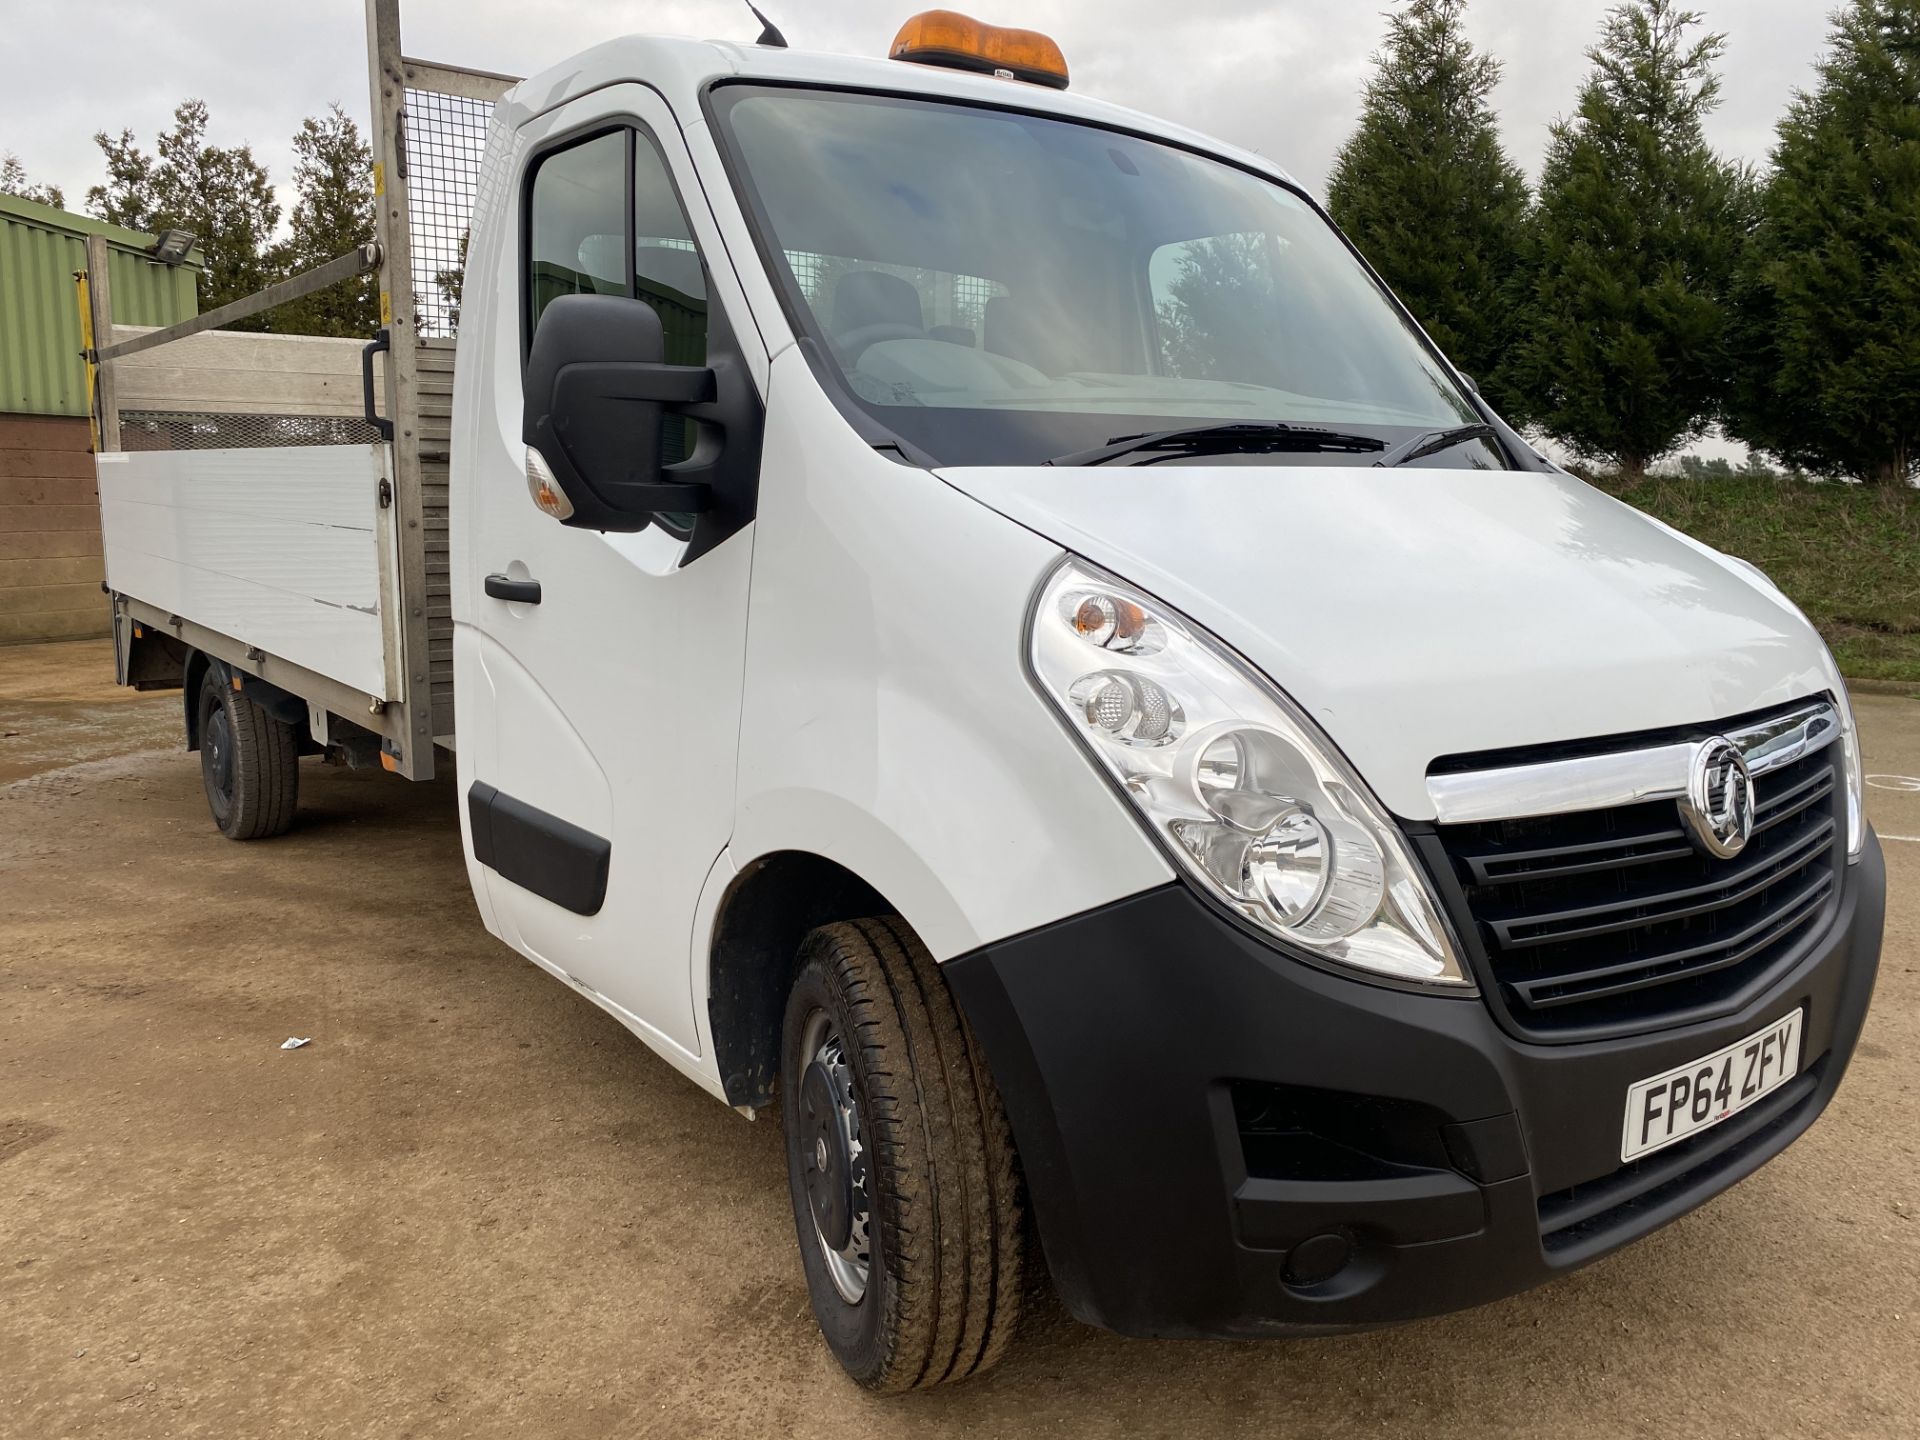 (On Sale) RENAULT MASTER / MOVANO 2.3CDTI LONG WHEEL BASE DROPSIDE WITH TAILLIFT- 2015 MODEL-1 OWNER - Image 2 of 13